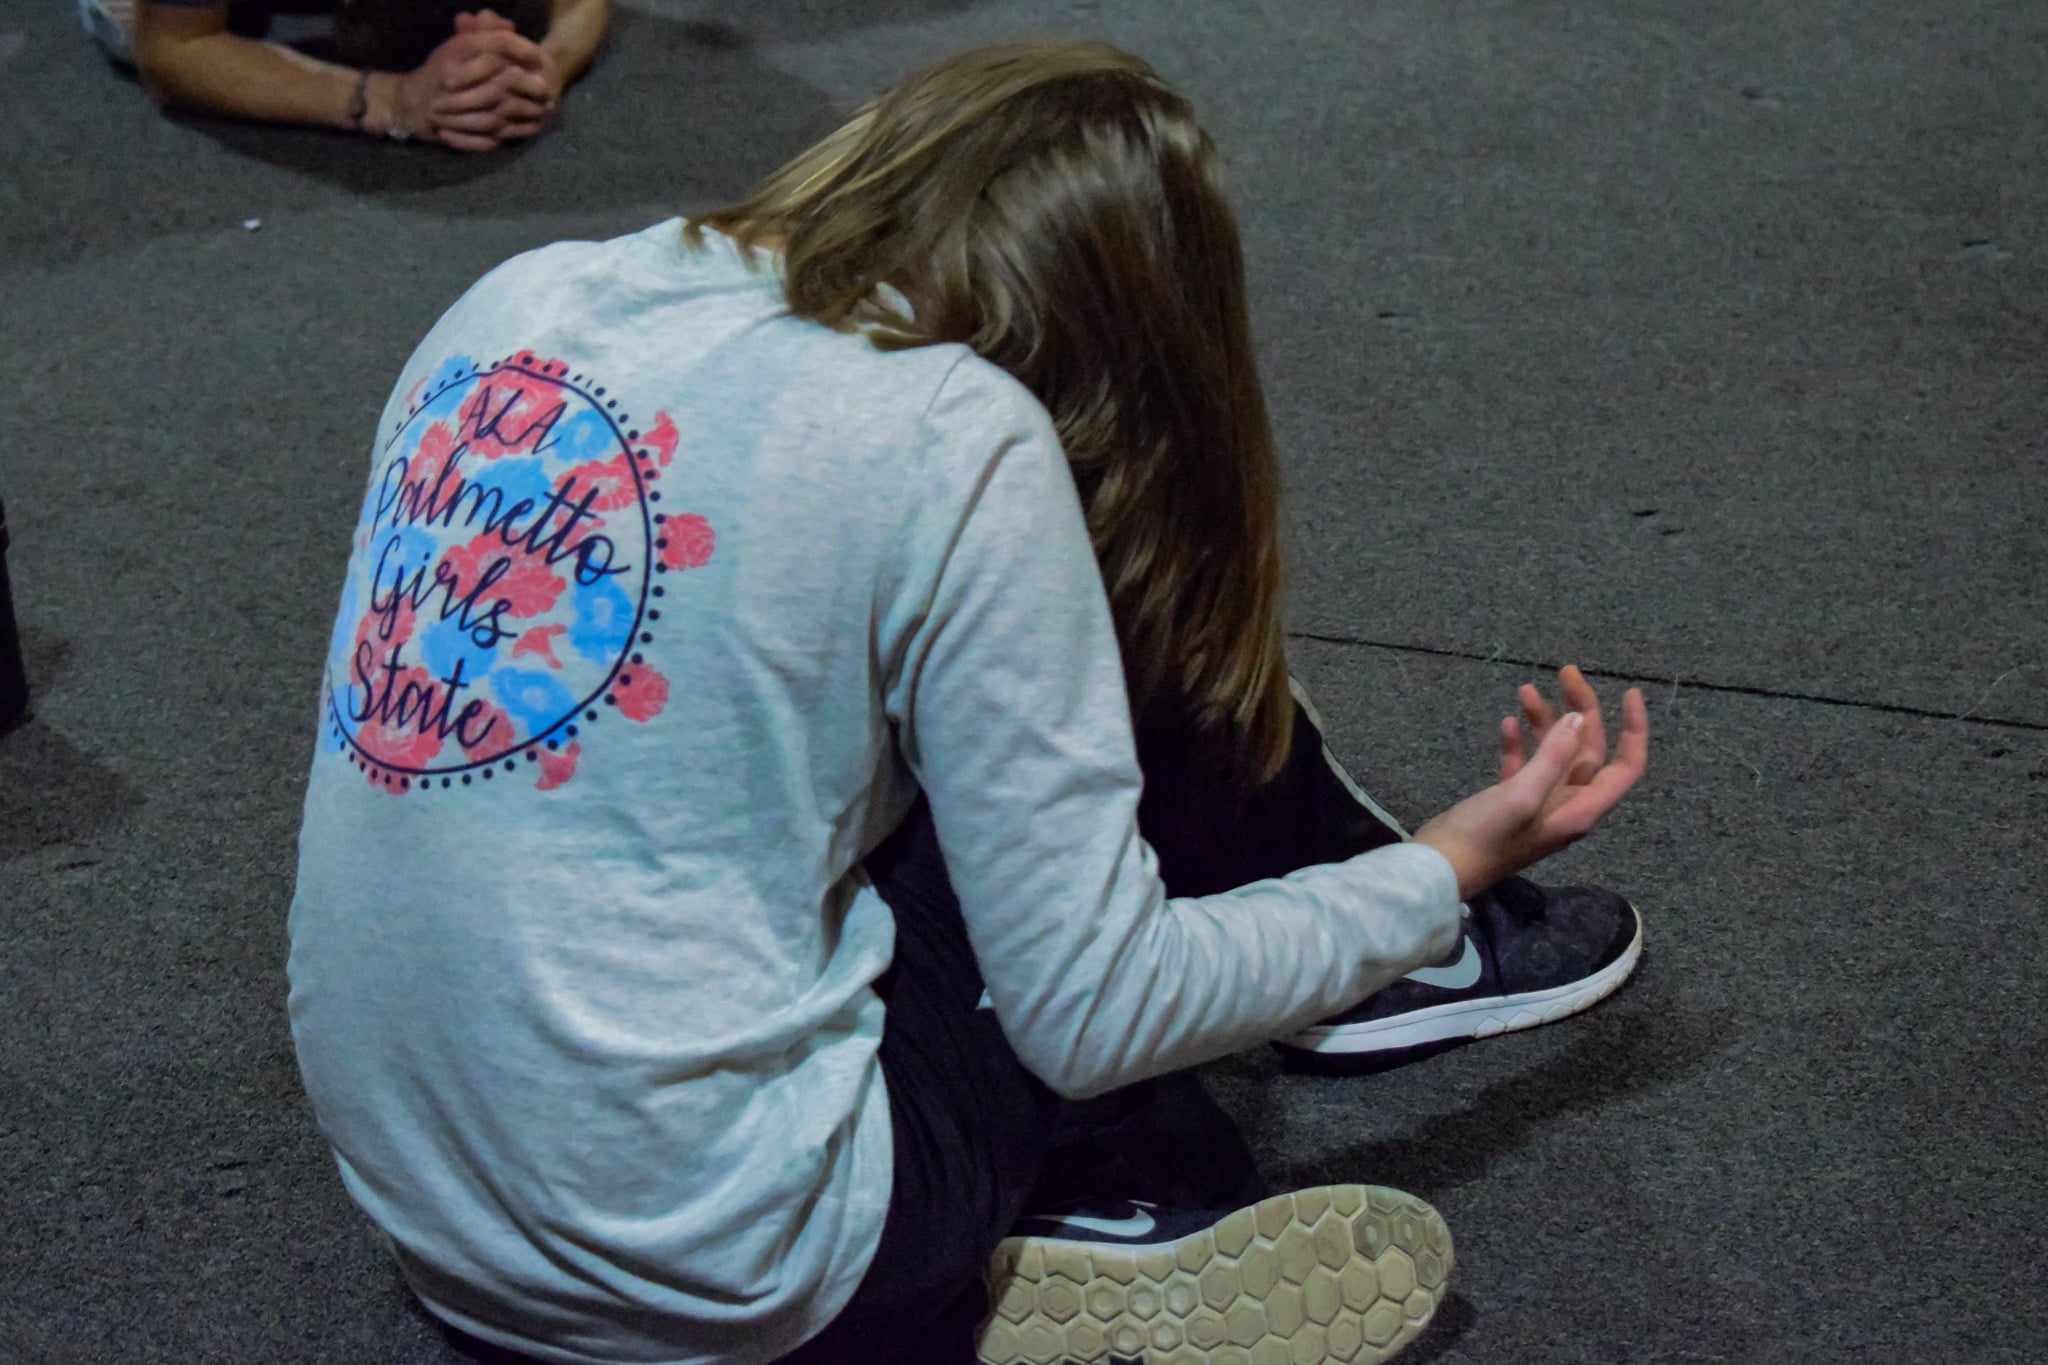 Sophomore, Eden Cassell feels the Spirit moving as they continue to pray over the school and student body.